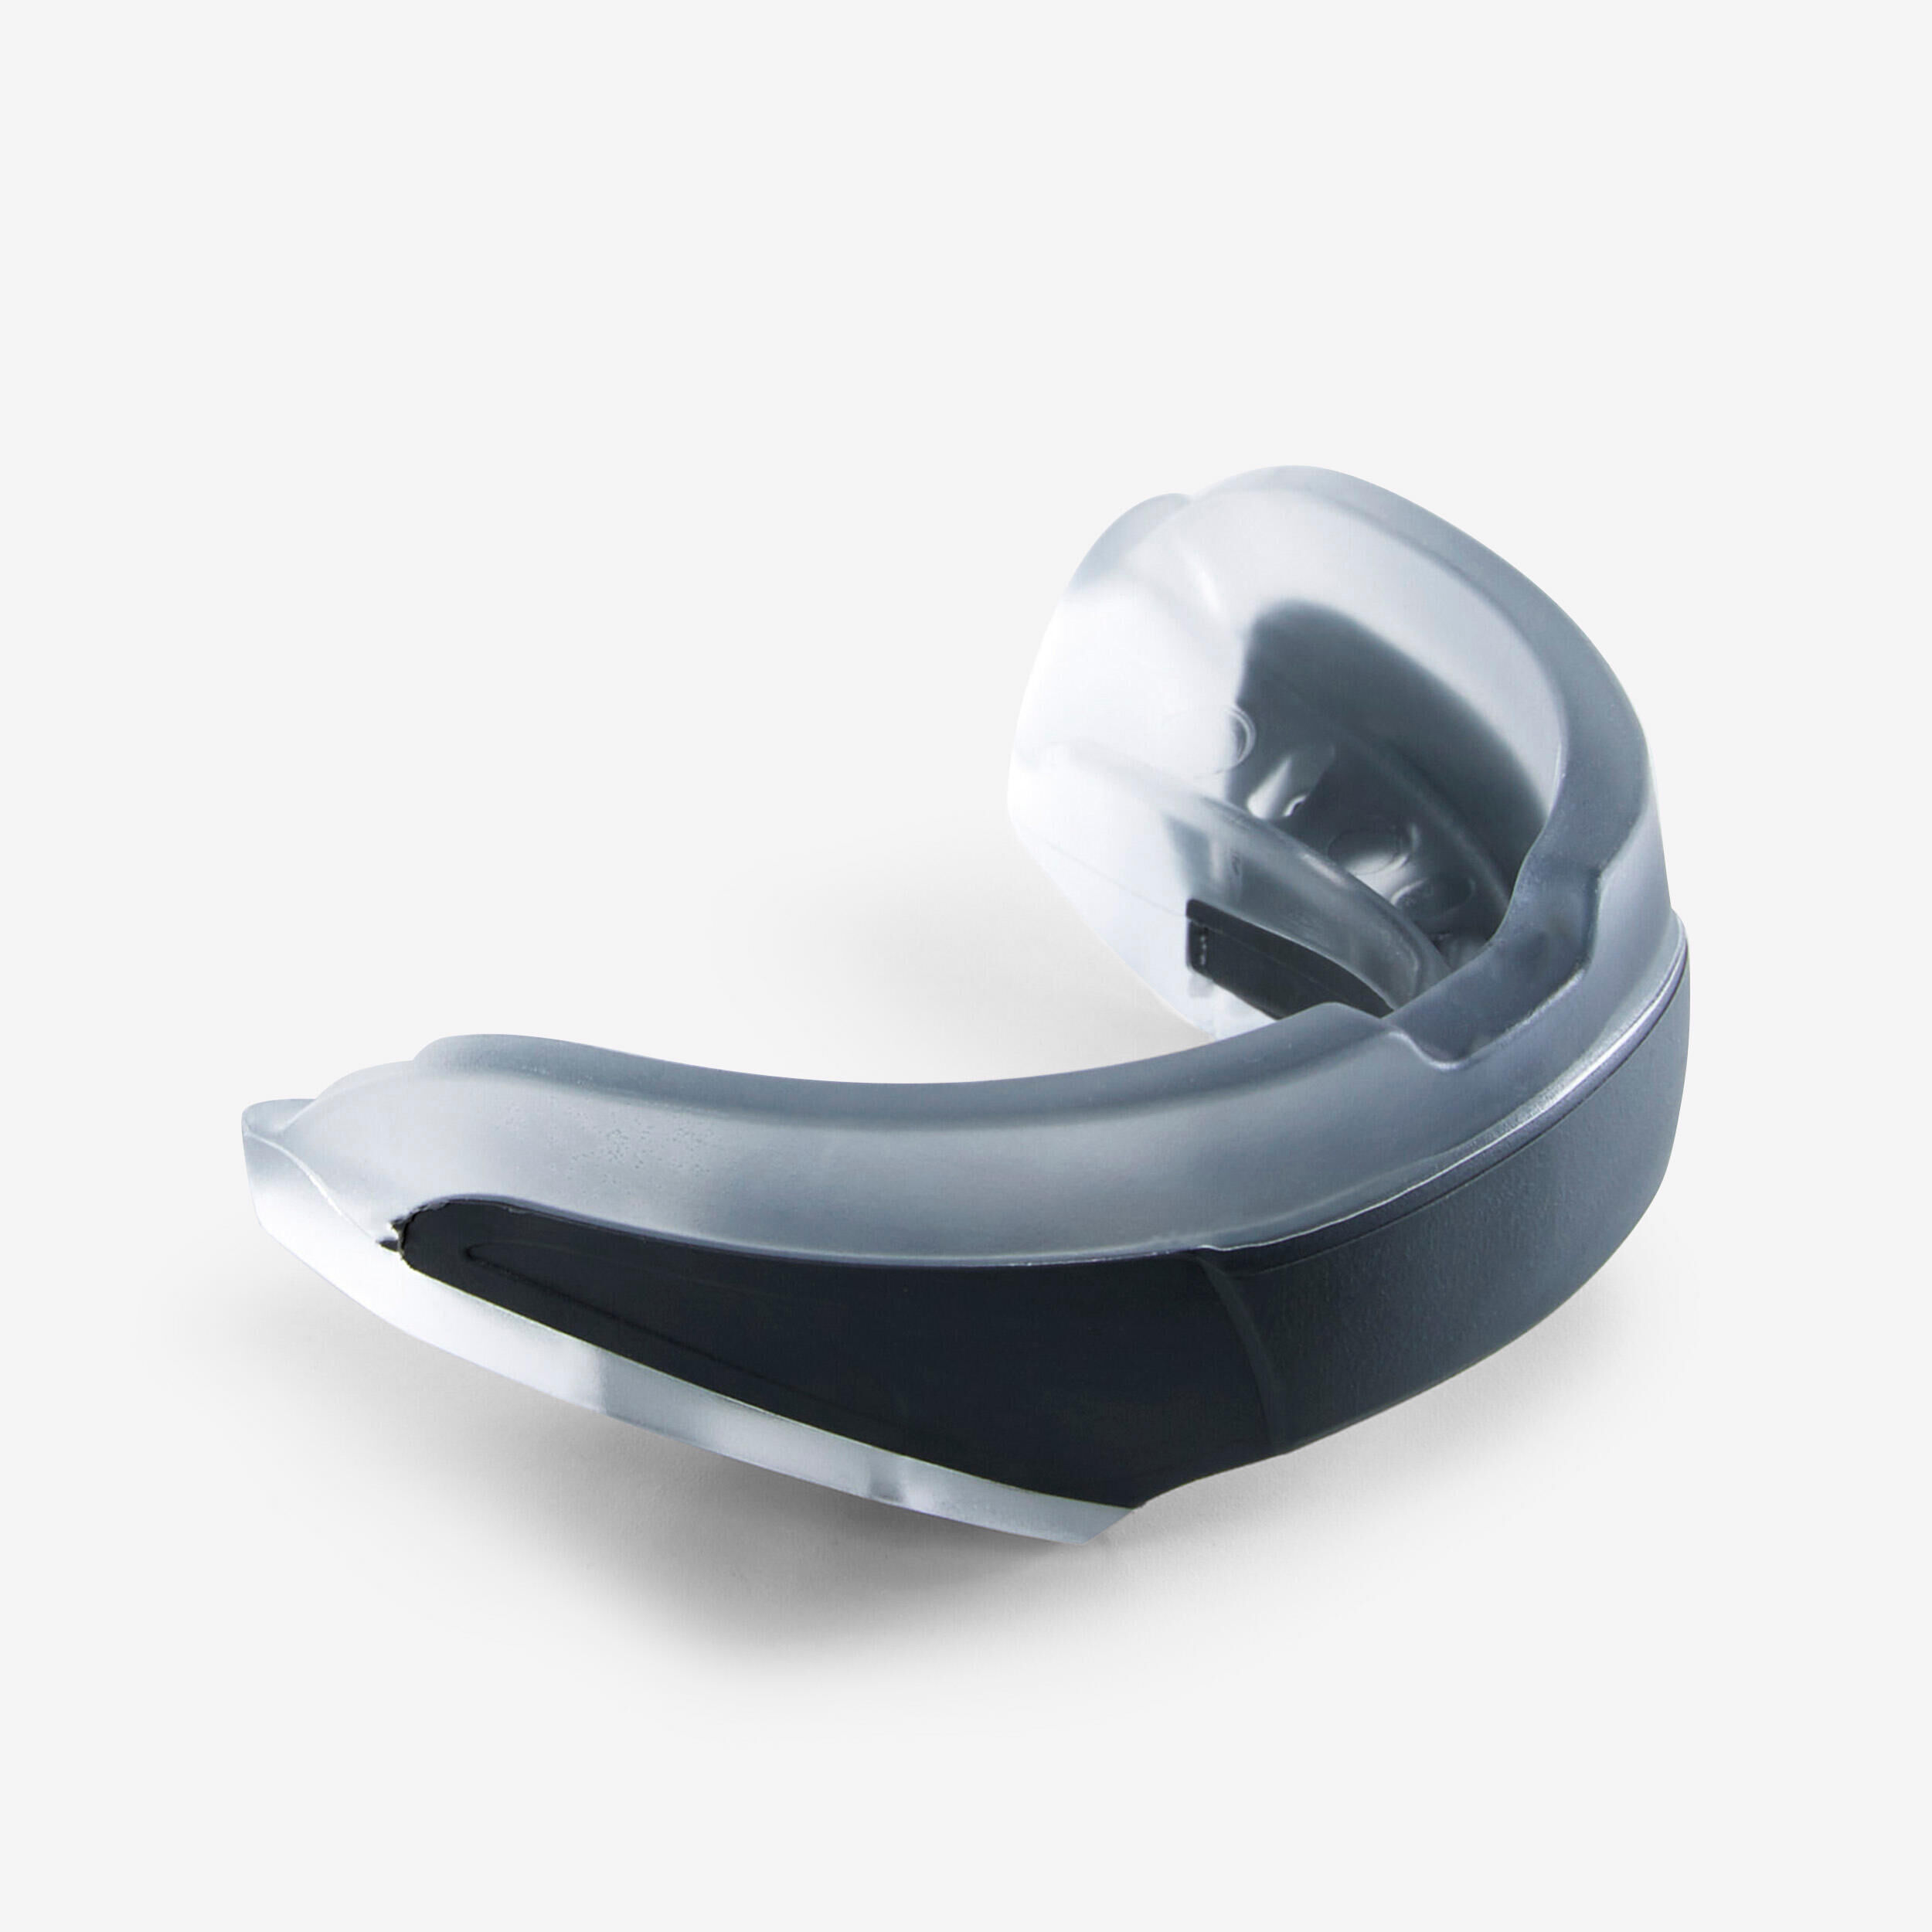 OUTSHOCK 500 Boxing Mouthguard Size M - Grey